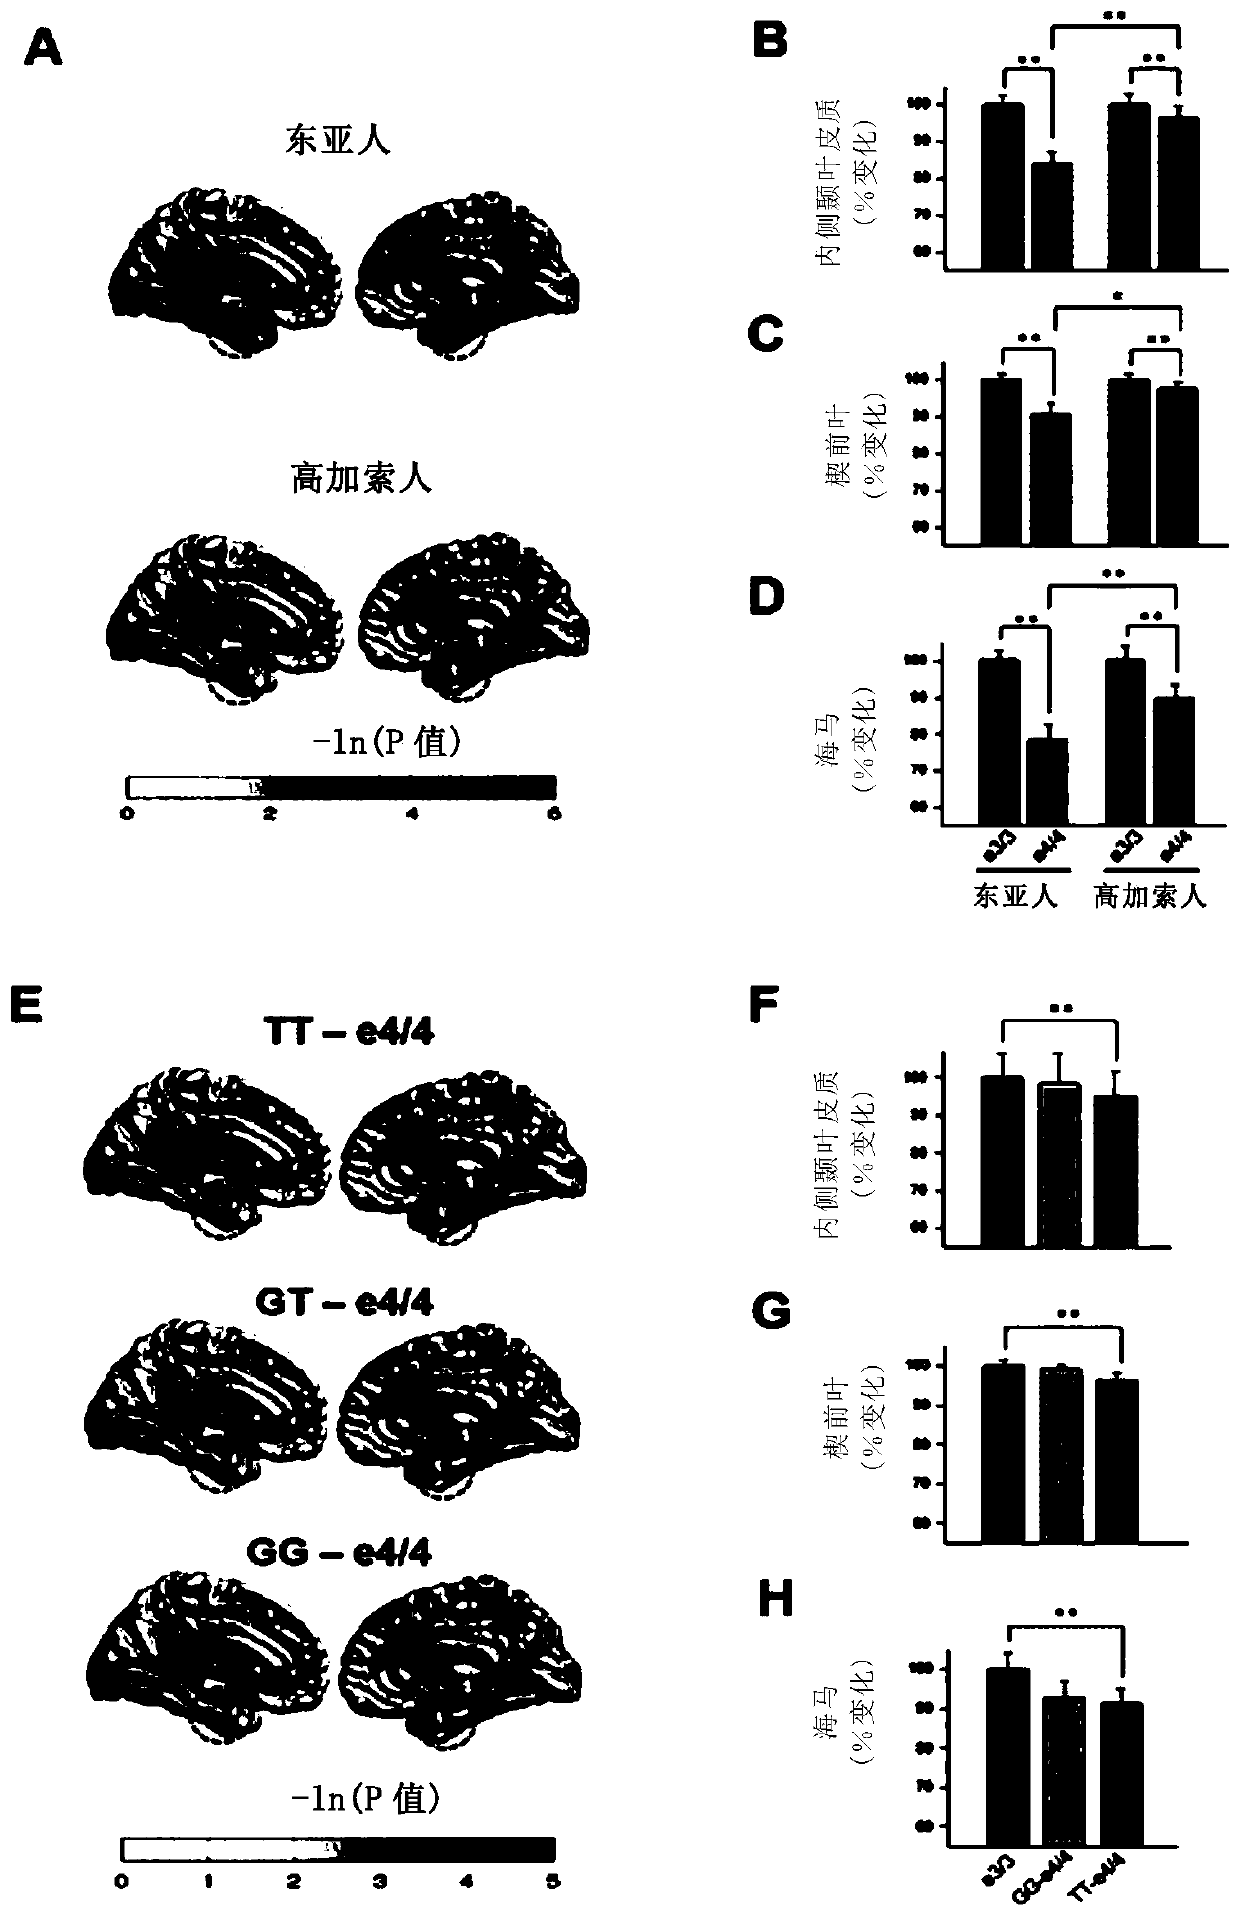 Apoe promoter single nucleotide polymorphism associated with alzheimer's disease risk and use thereof